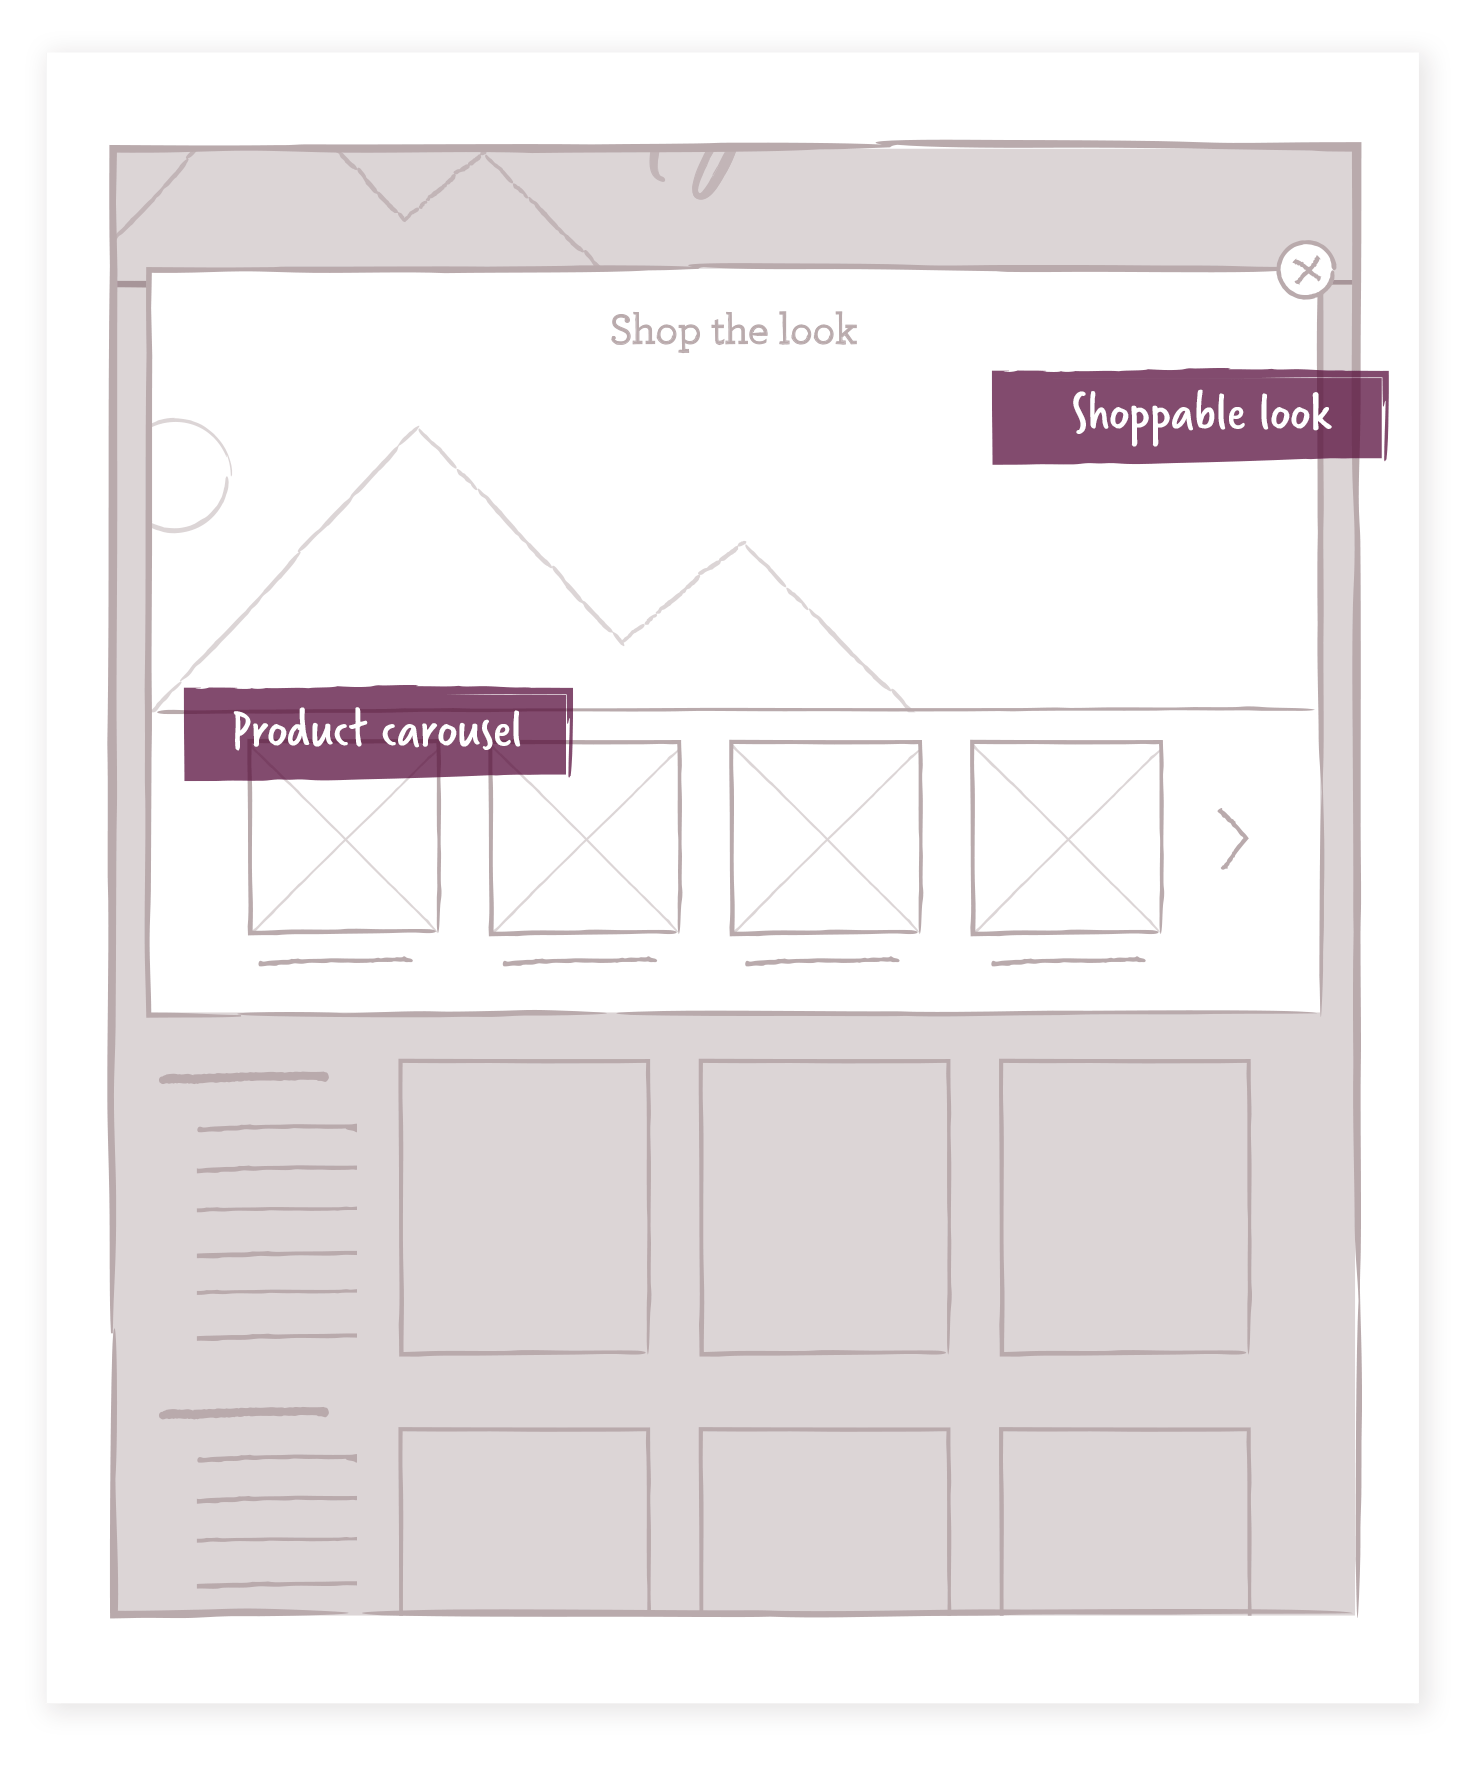 Your Style Guide wireframe